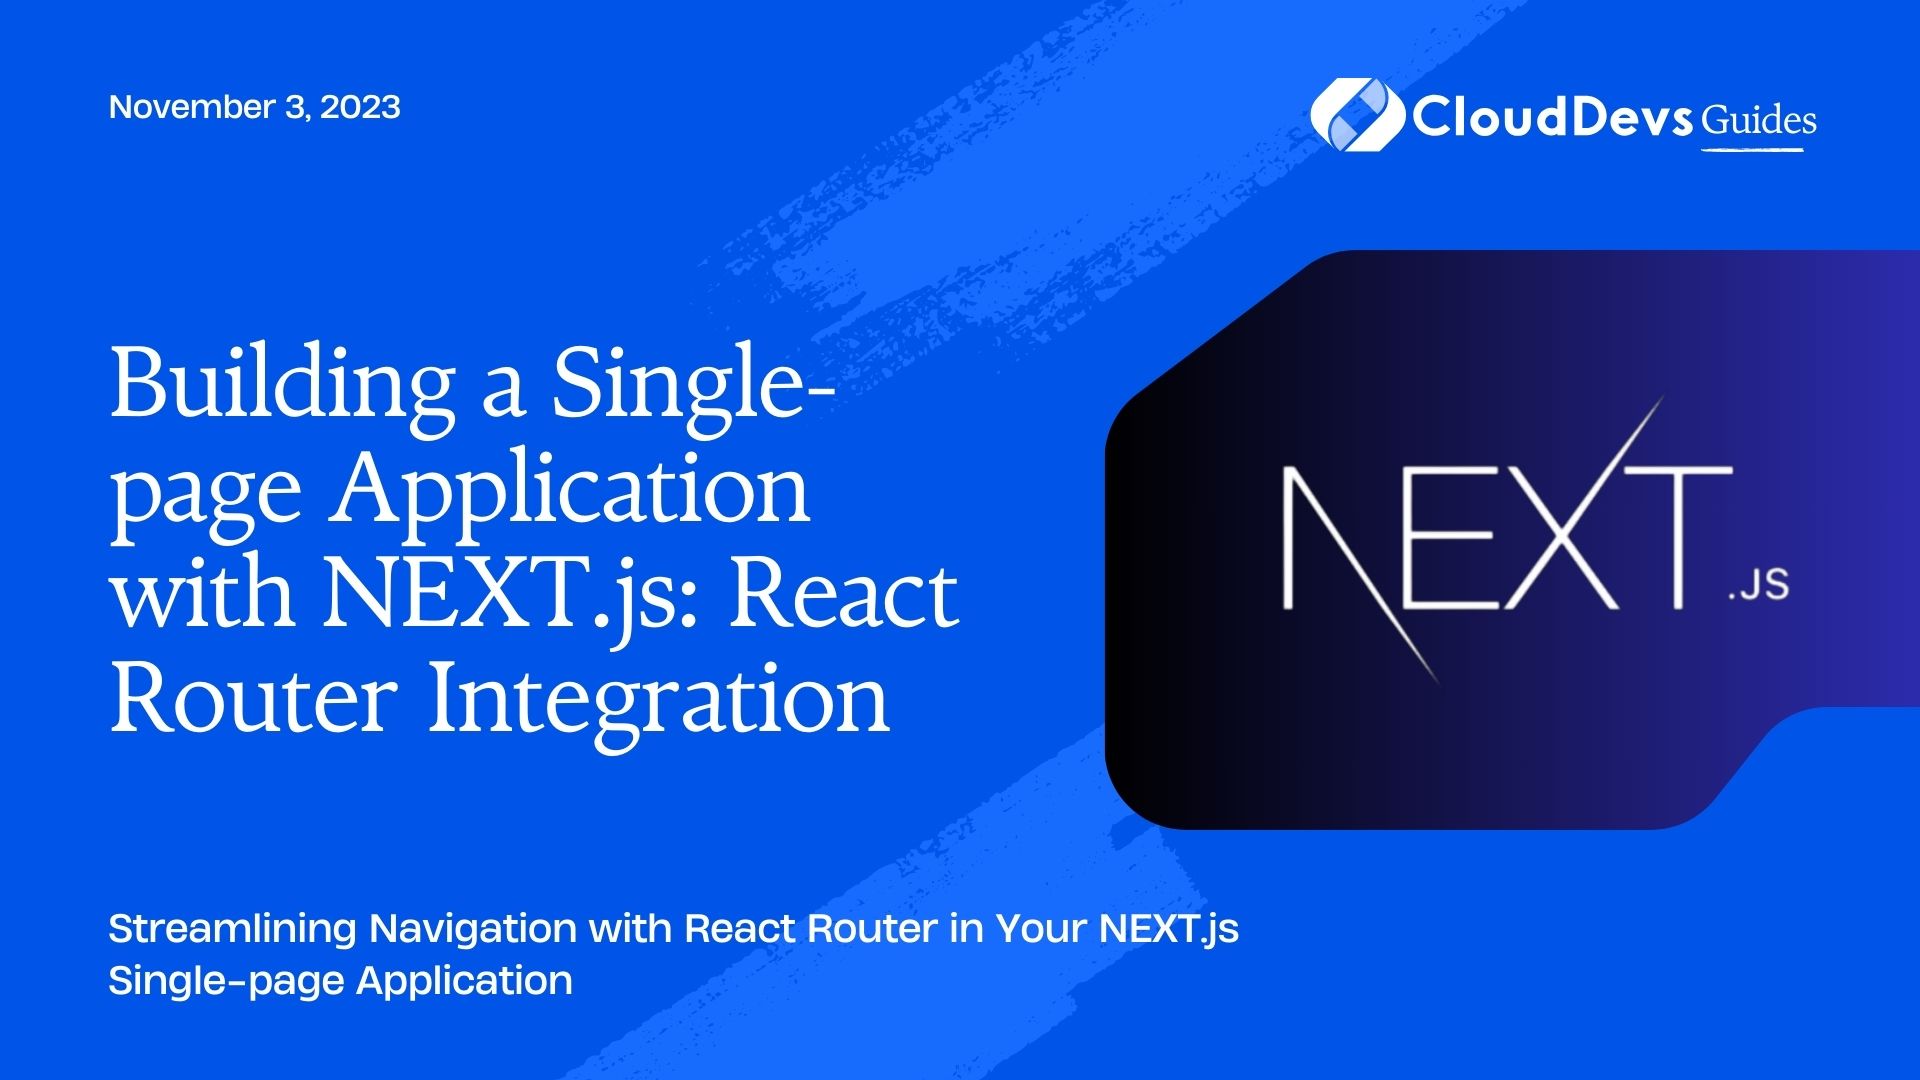 Building a Single-page Application with NEXT.js: React Router Integration